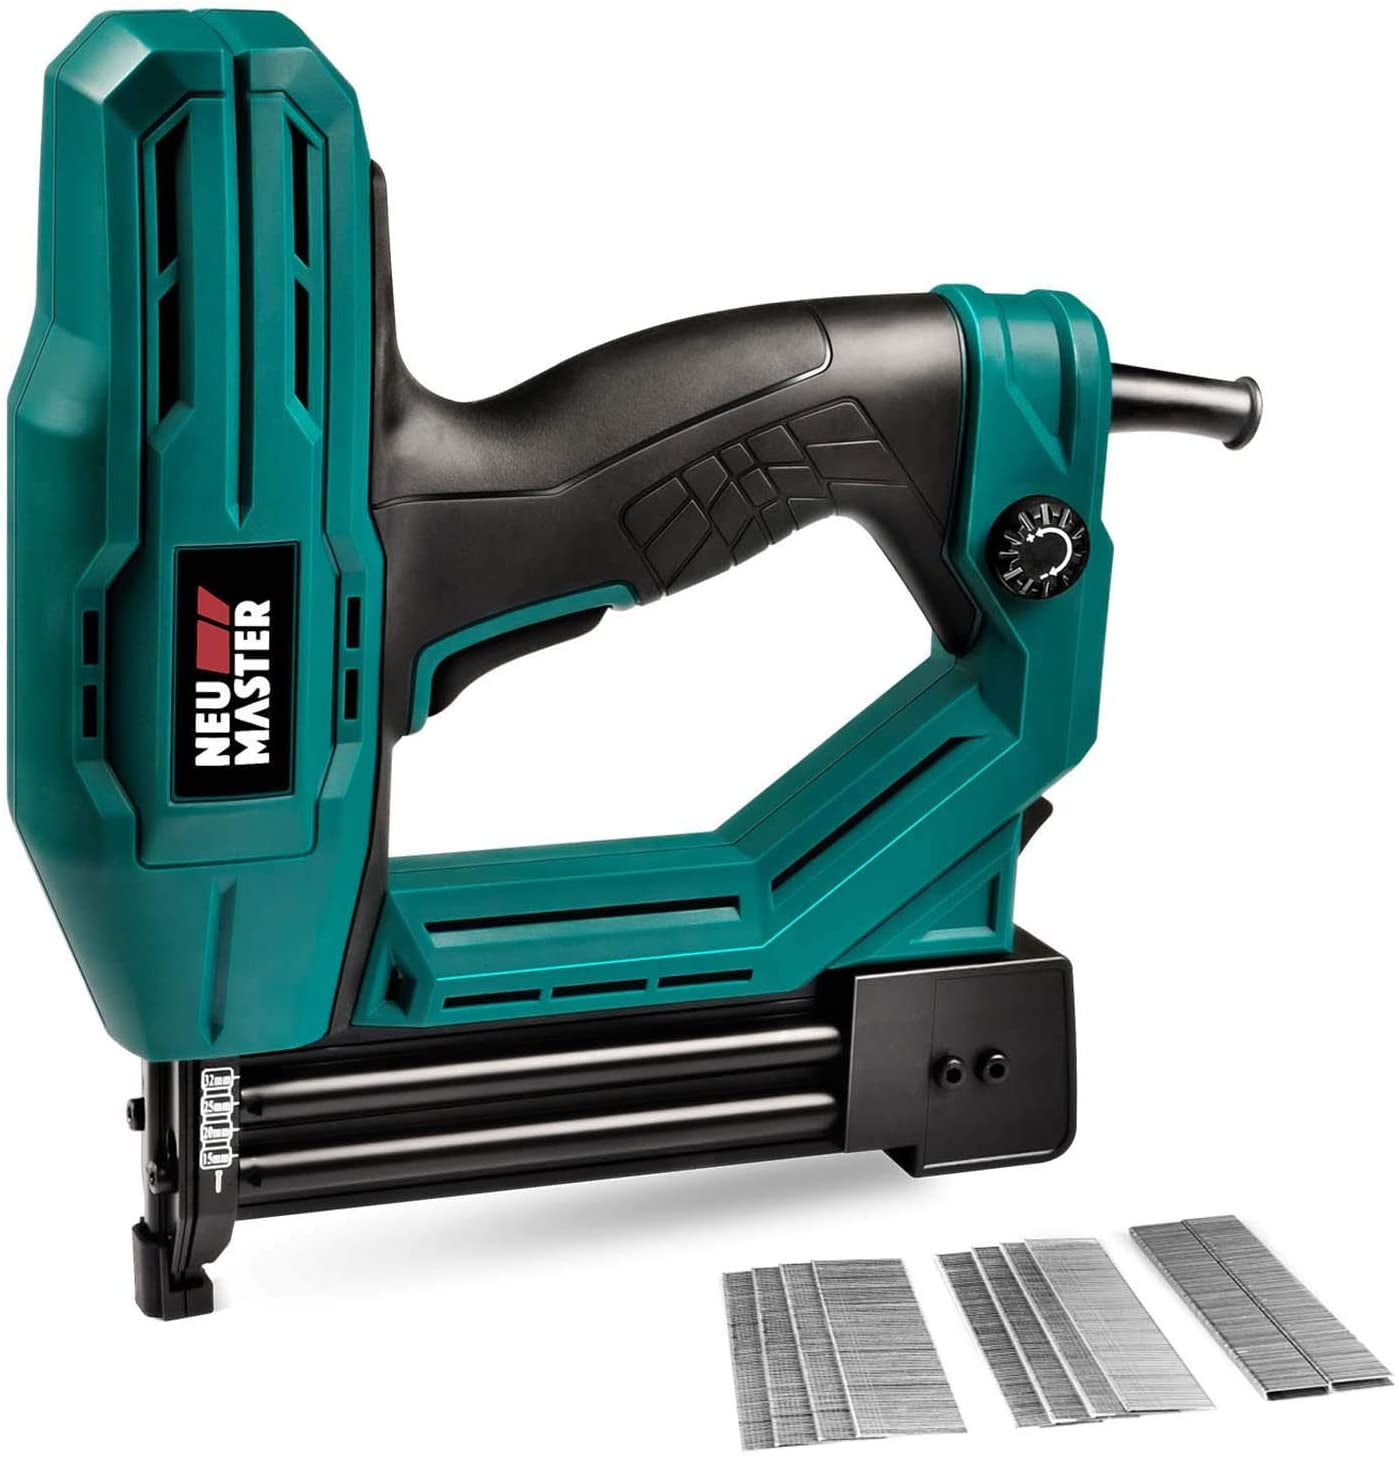 Electric Brad Nailer, Works with 18 Gauge Brad Nails up to 1-1/4 inch - Bed  Bath & Beyond - 37481984